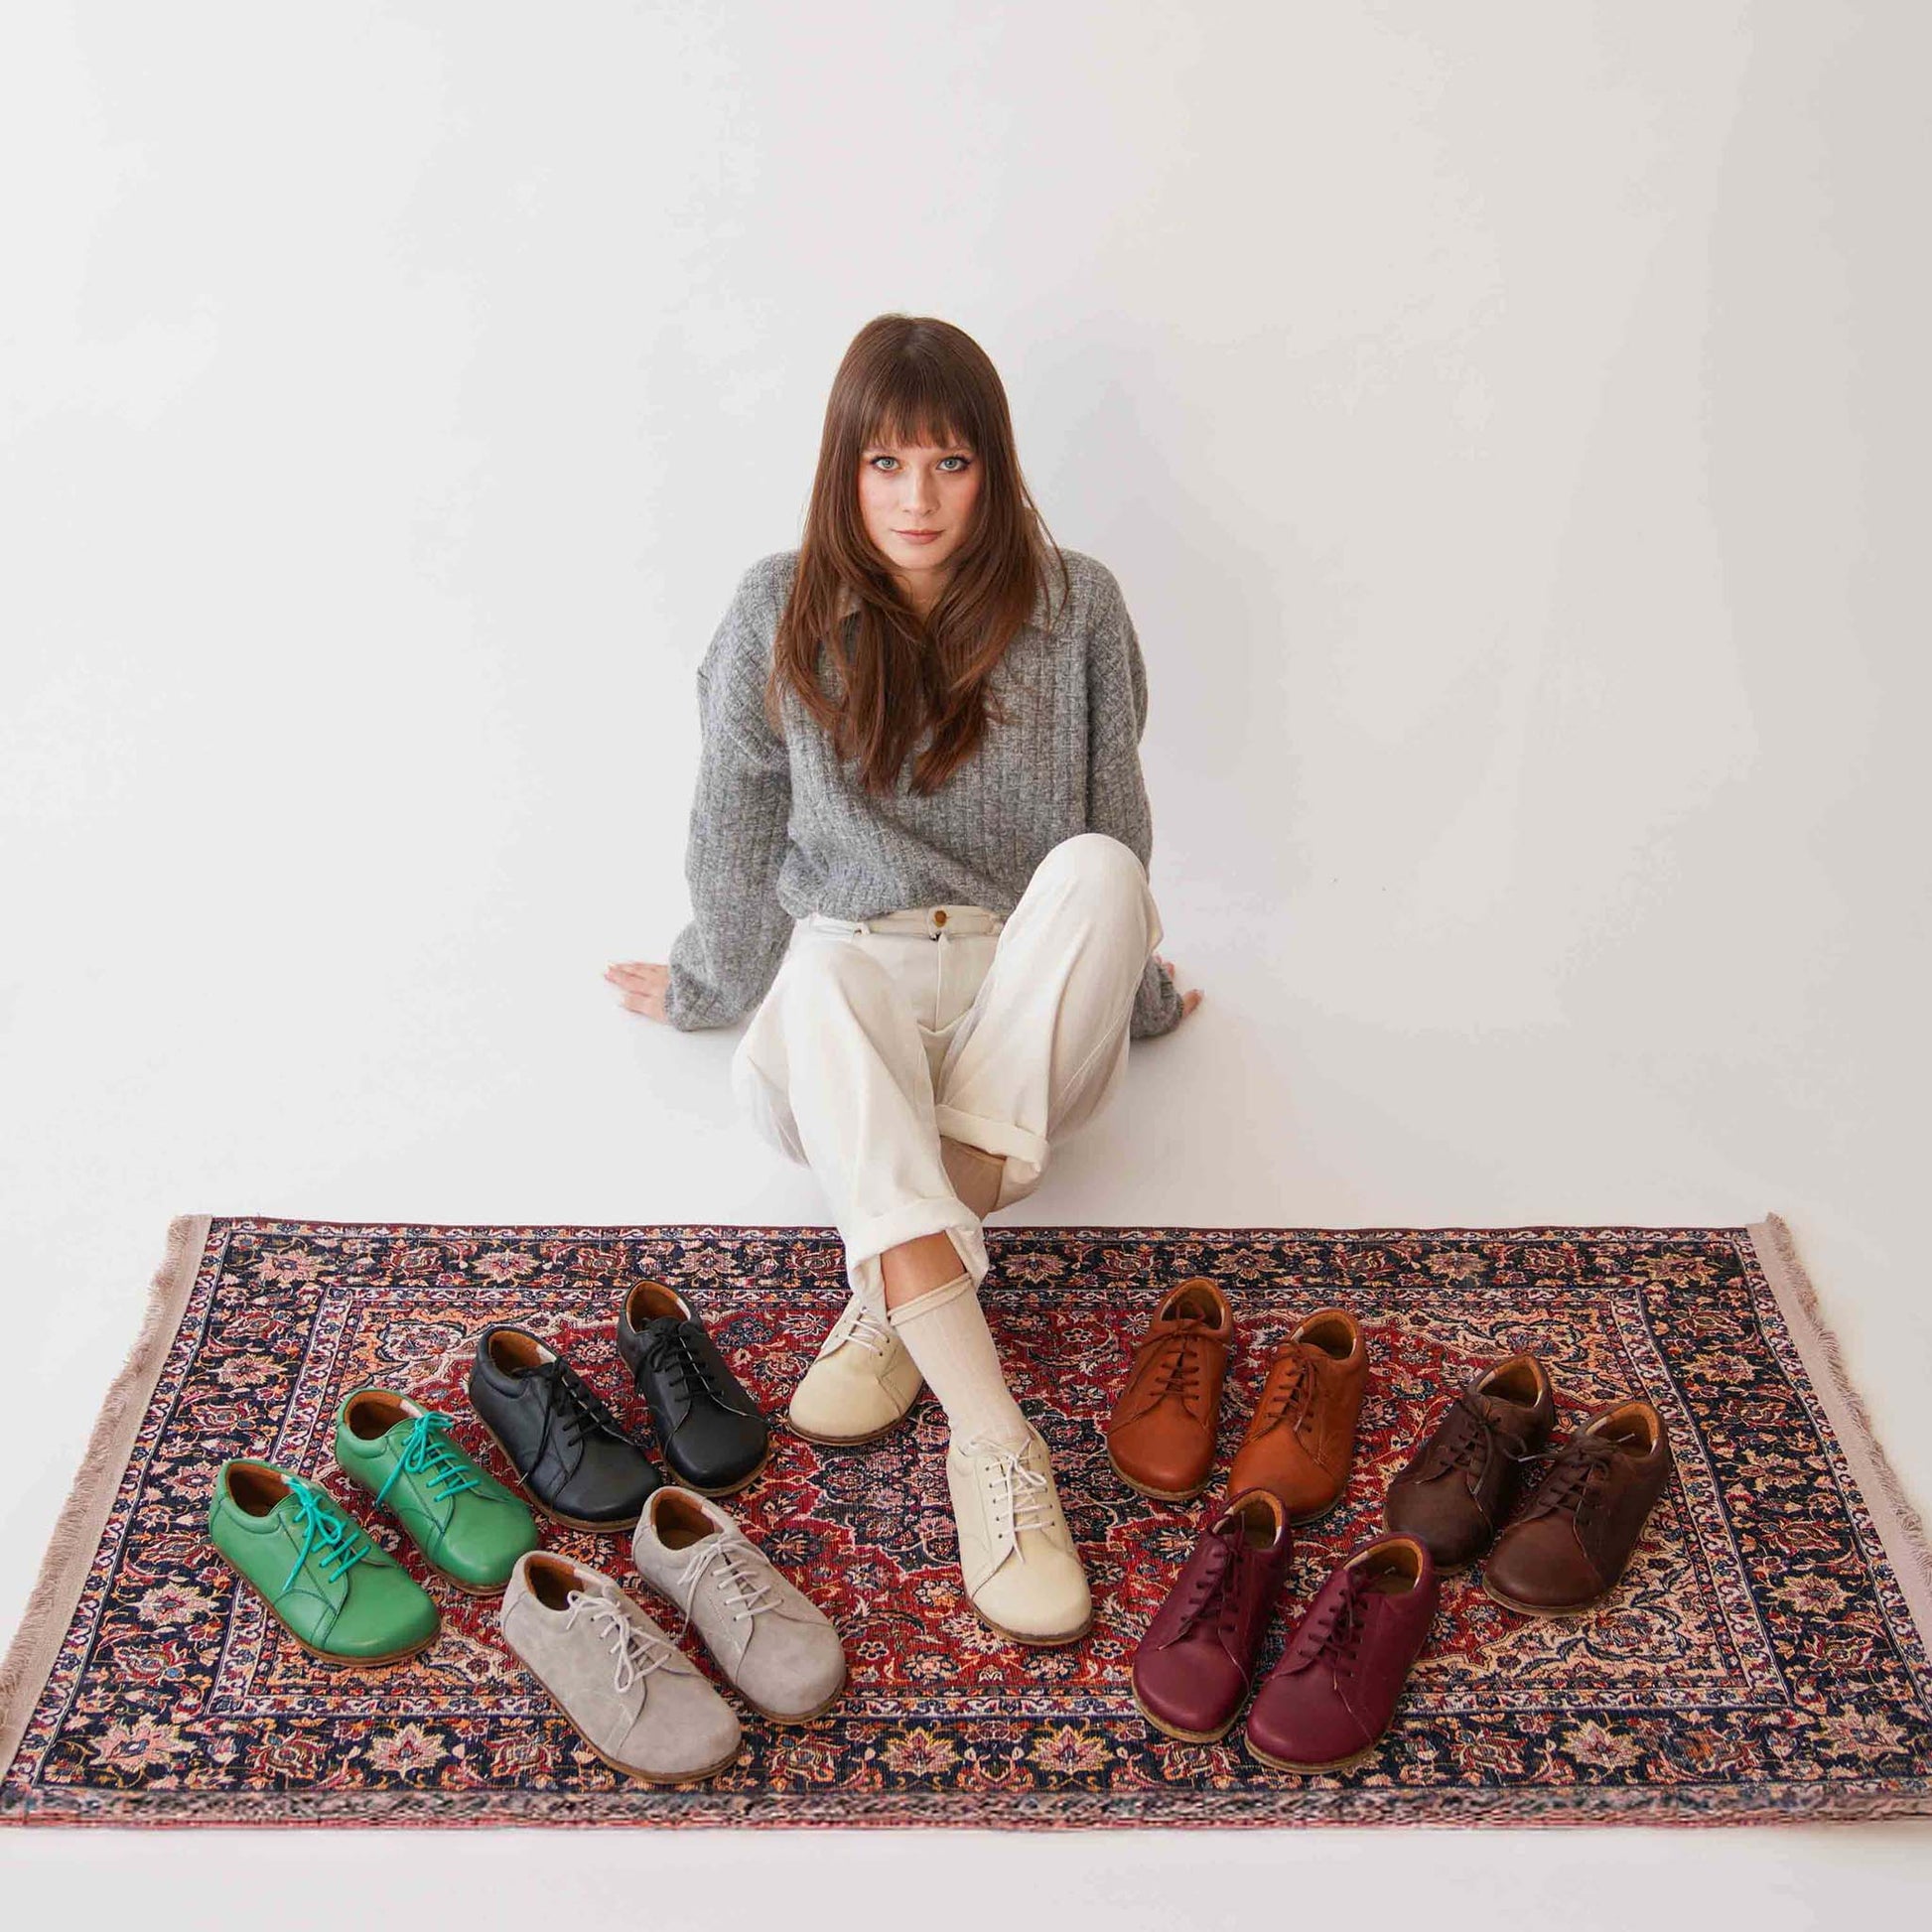 Model seated on a vibrant rug, wearing beige leather barefoot women's sneakers, portraying a blend of fashion and comfort.